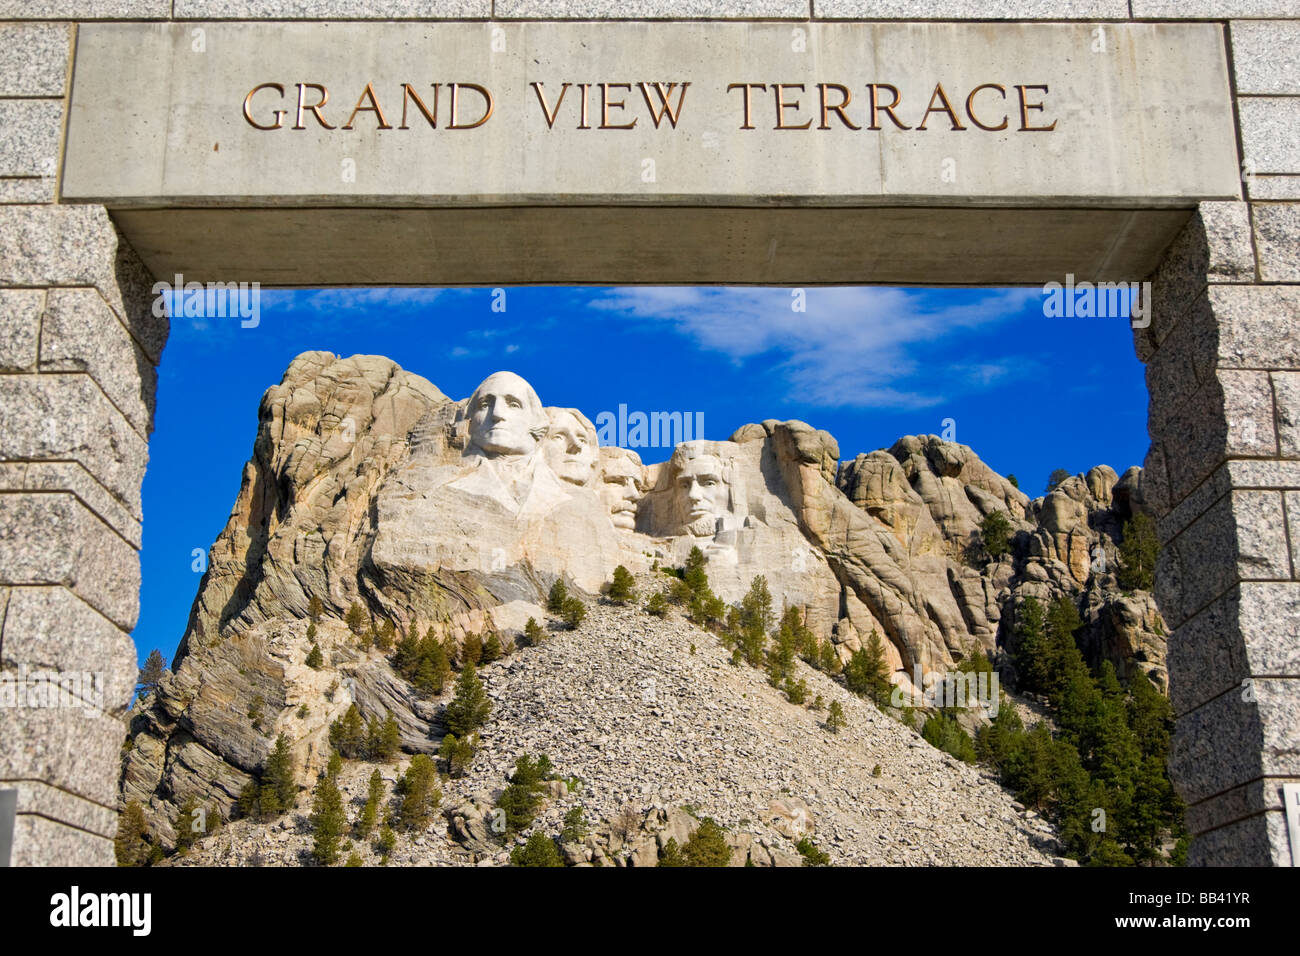 USA, South Dakota. Overview of Mount Rushmore National Memorial in daytime framed by Grand View Terrace. Stock Photo